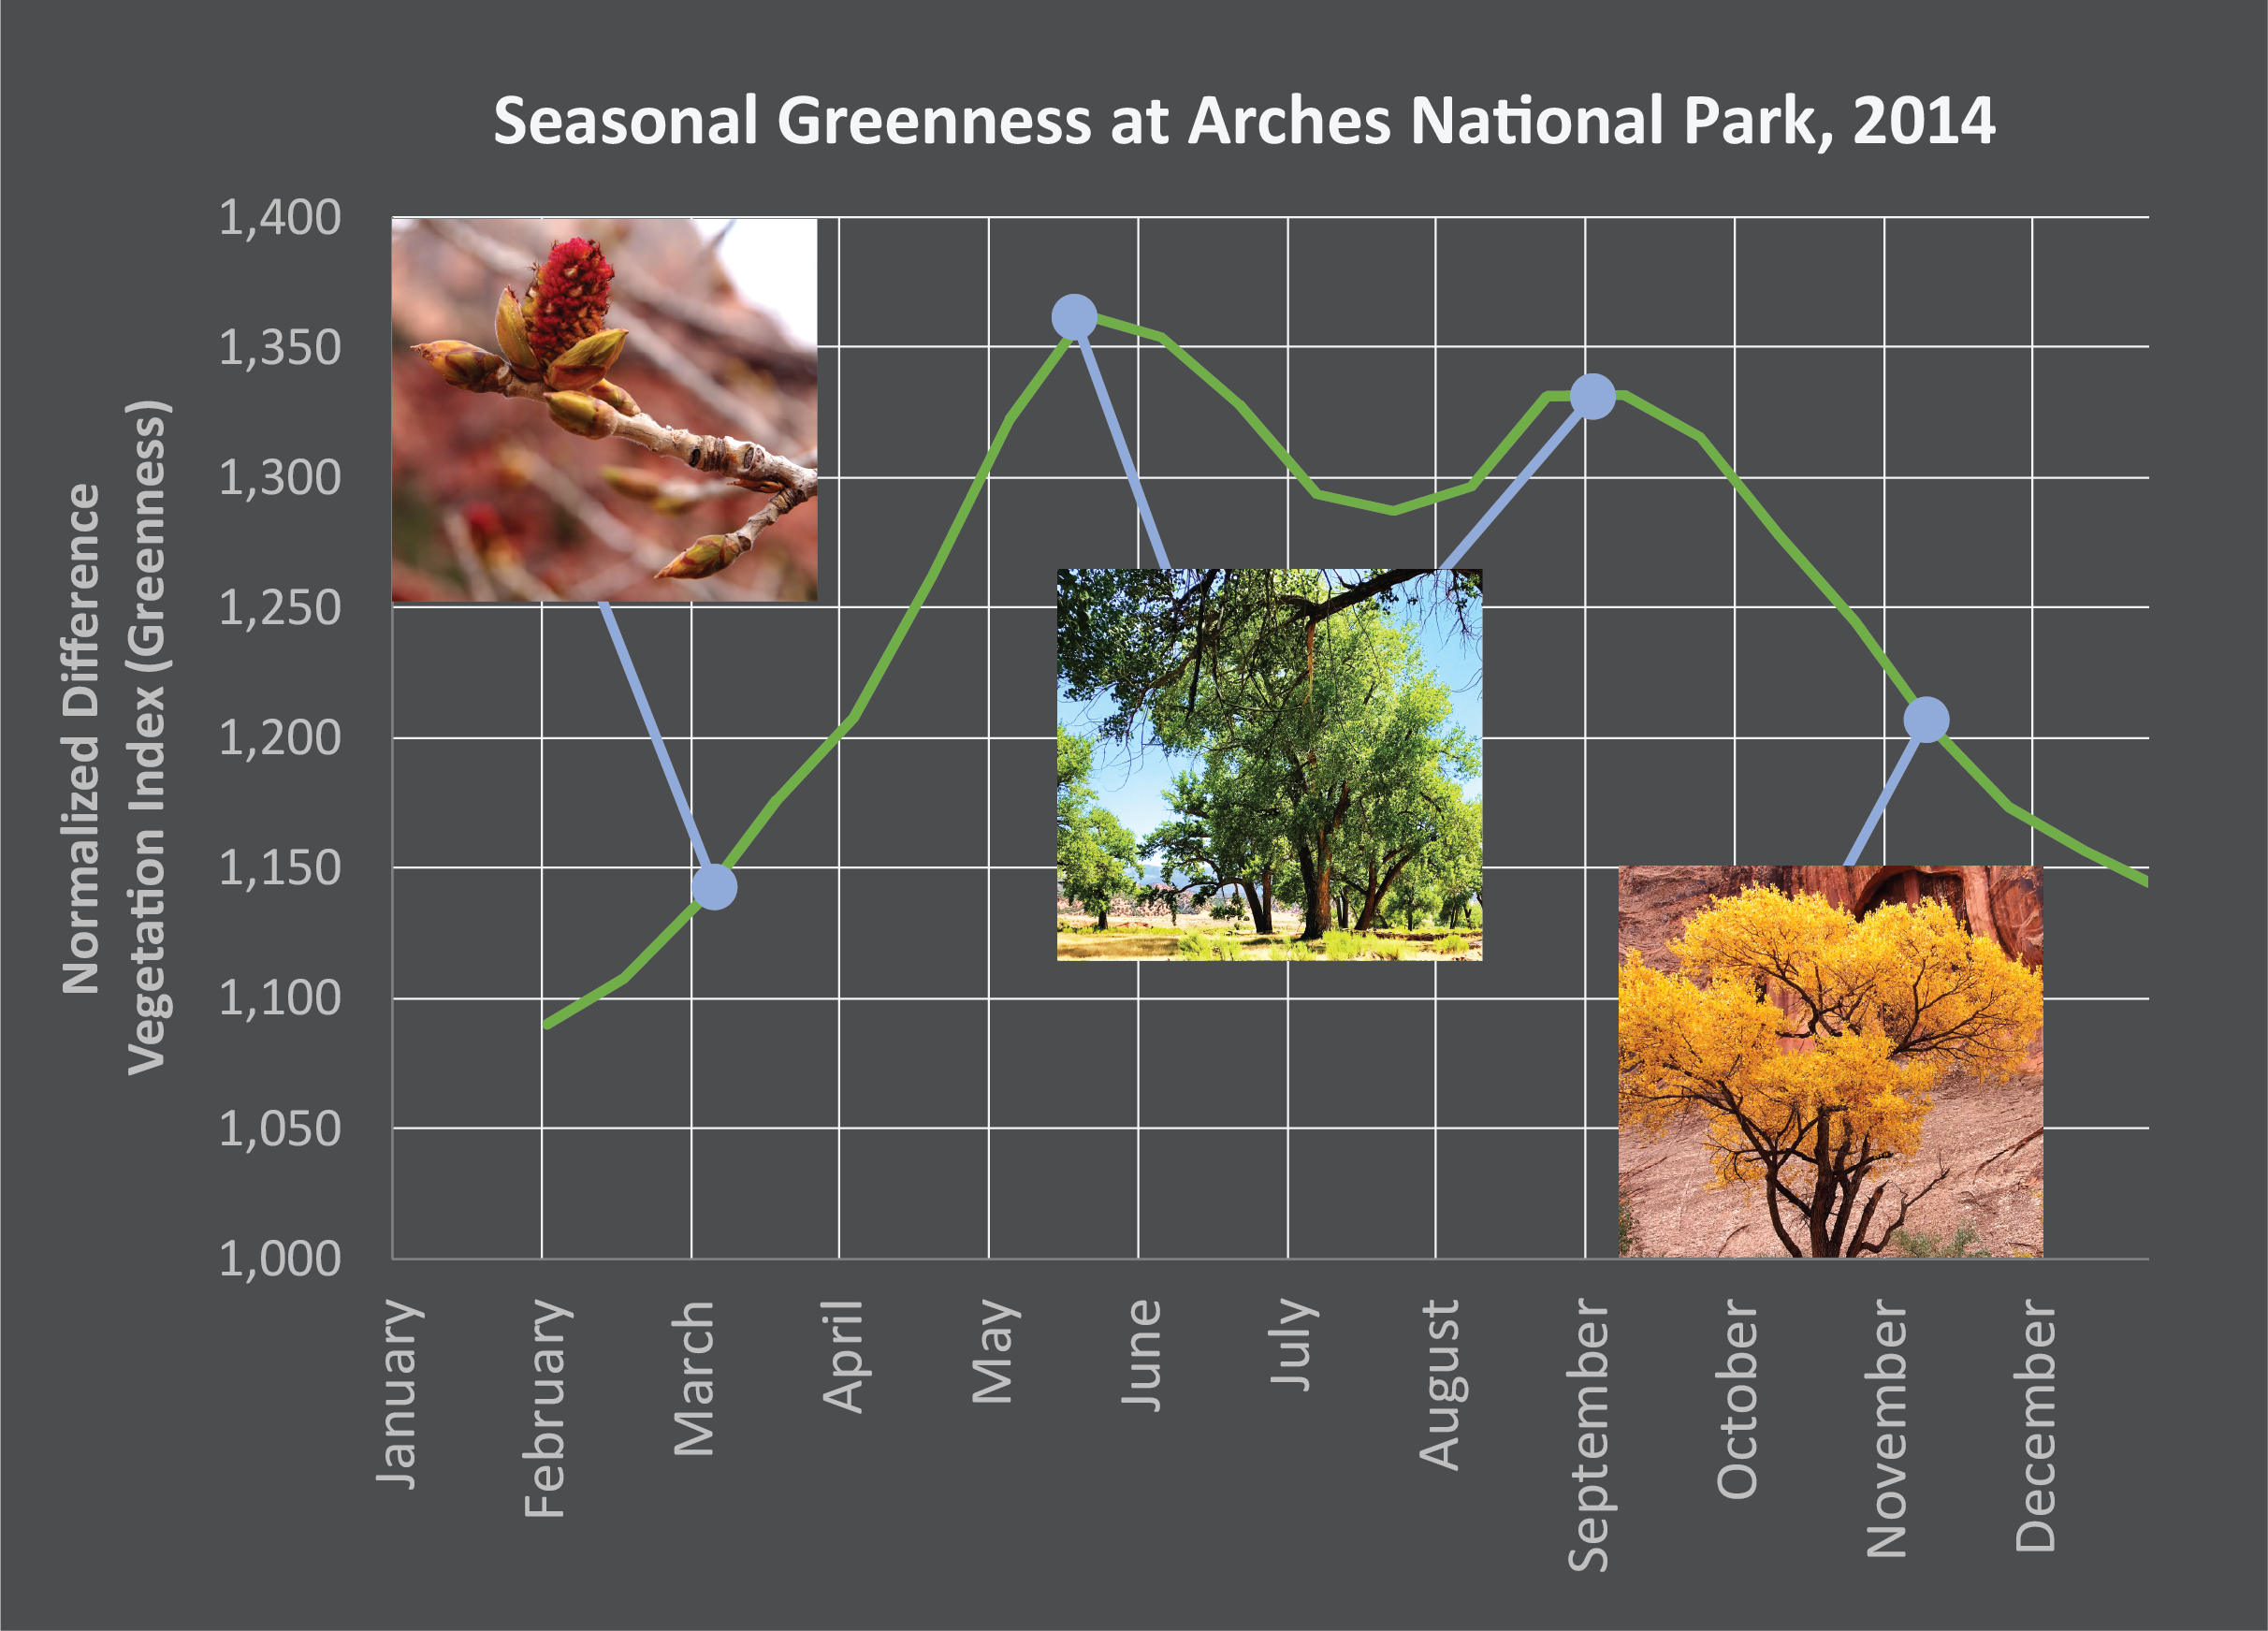 Line graph showing level of “greenness” across the months of one year. Three photos of plant life illustrate different points on the timeline.